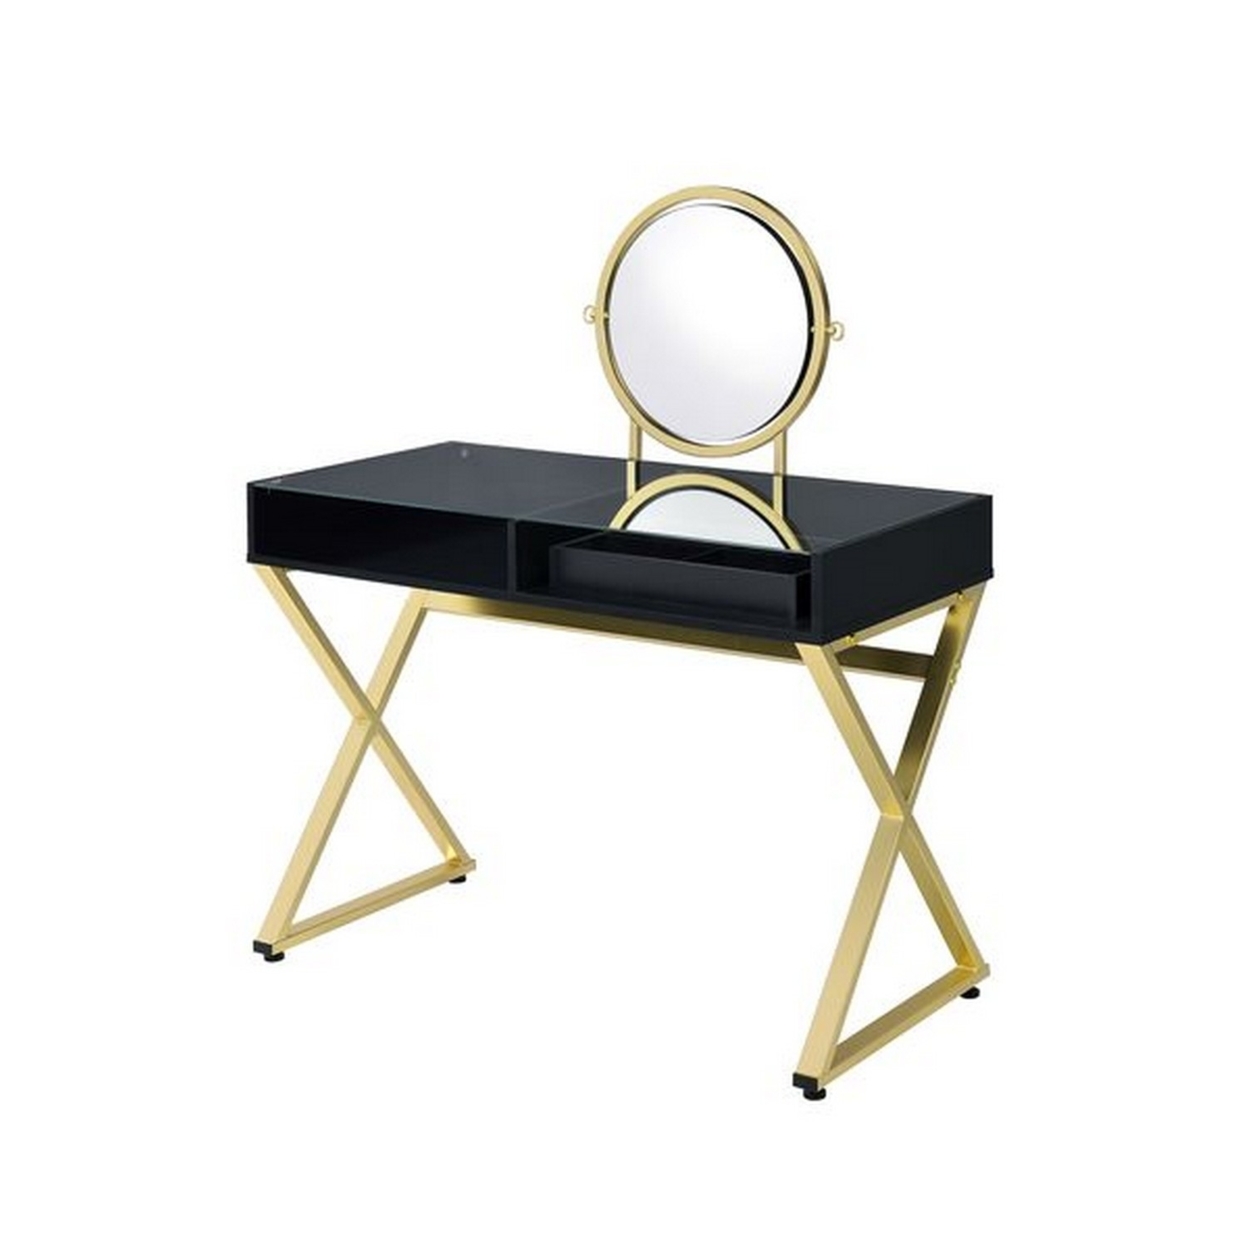 Vanity Desk With Round Mirror And Cross Metal Legs, Black And Gold- Saltoro Sherpi